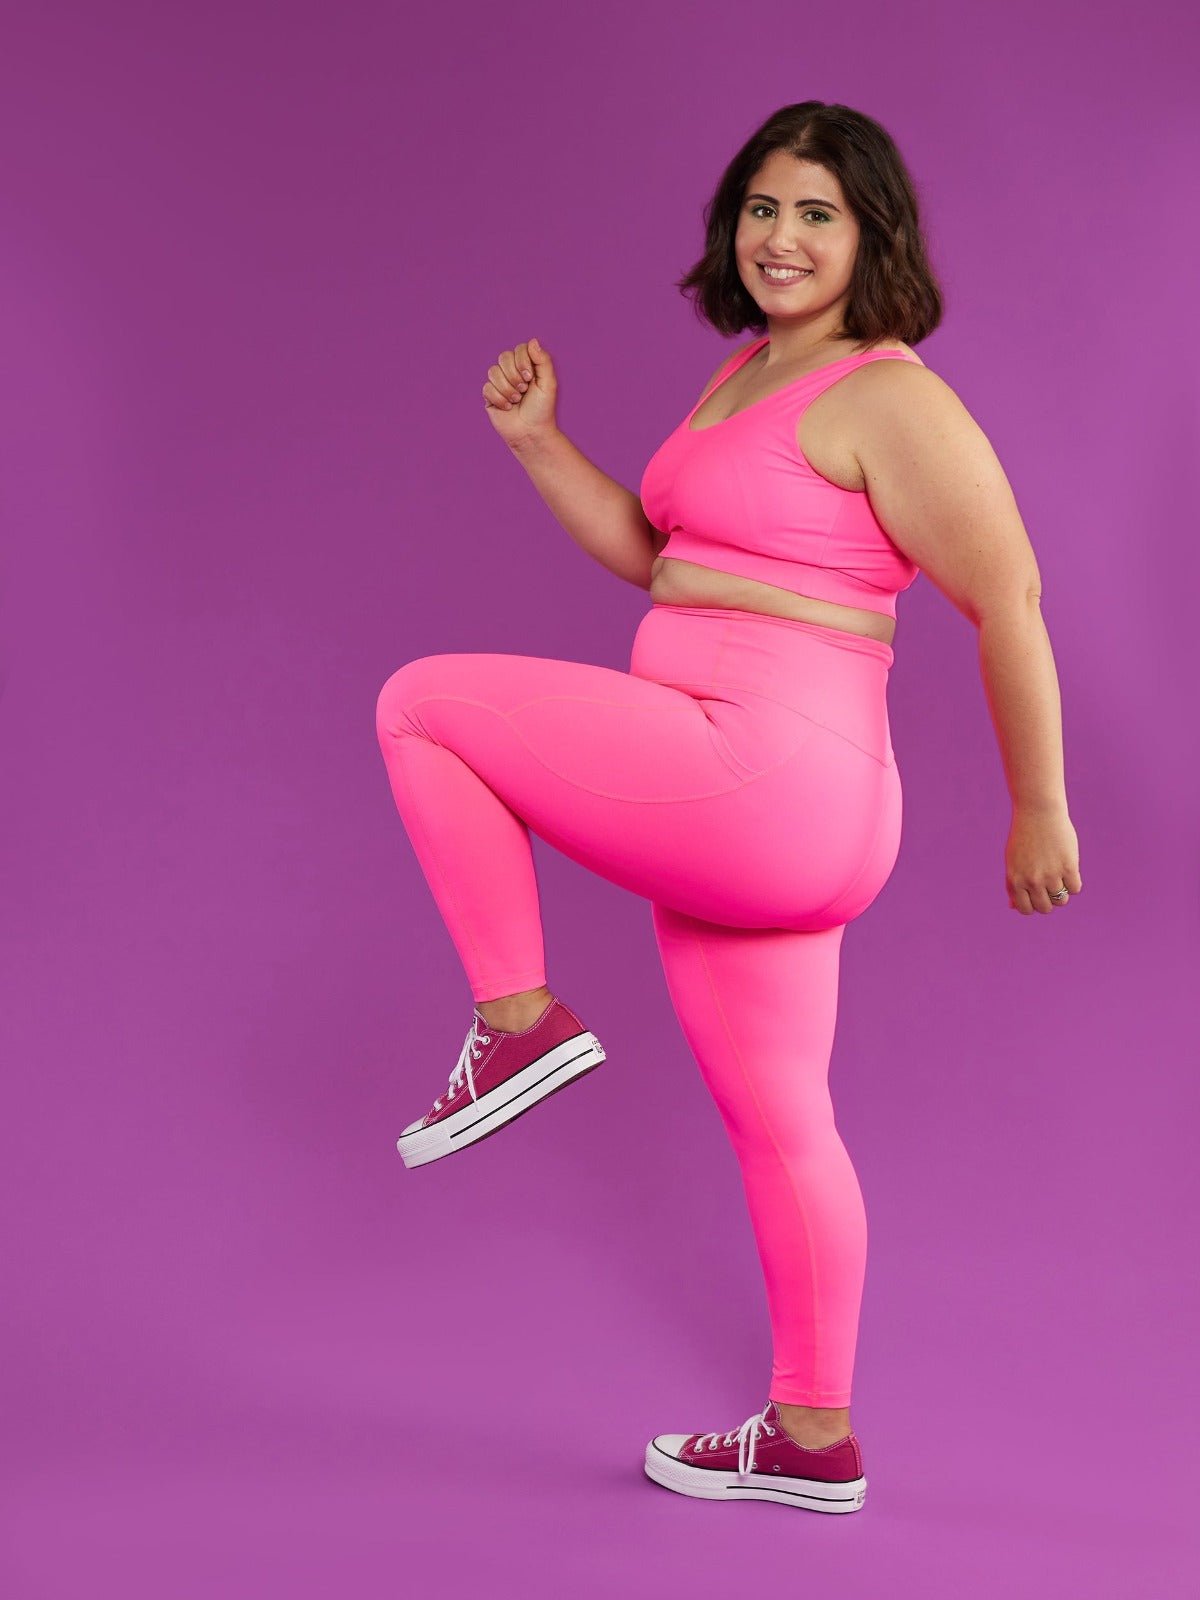 Neon Pink Everyday Legging - 7/8 length - neon pink high waisted tights with pockets